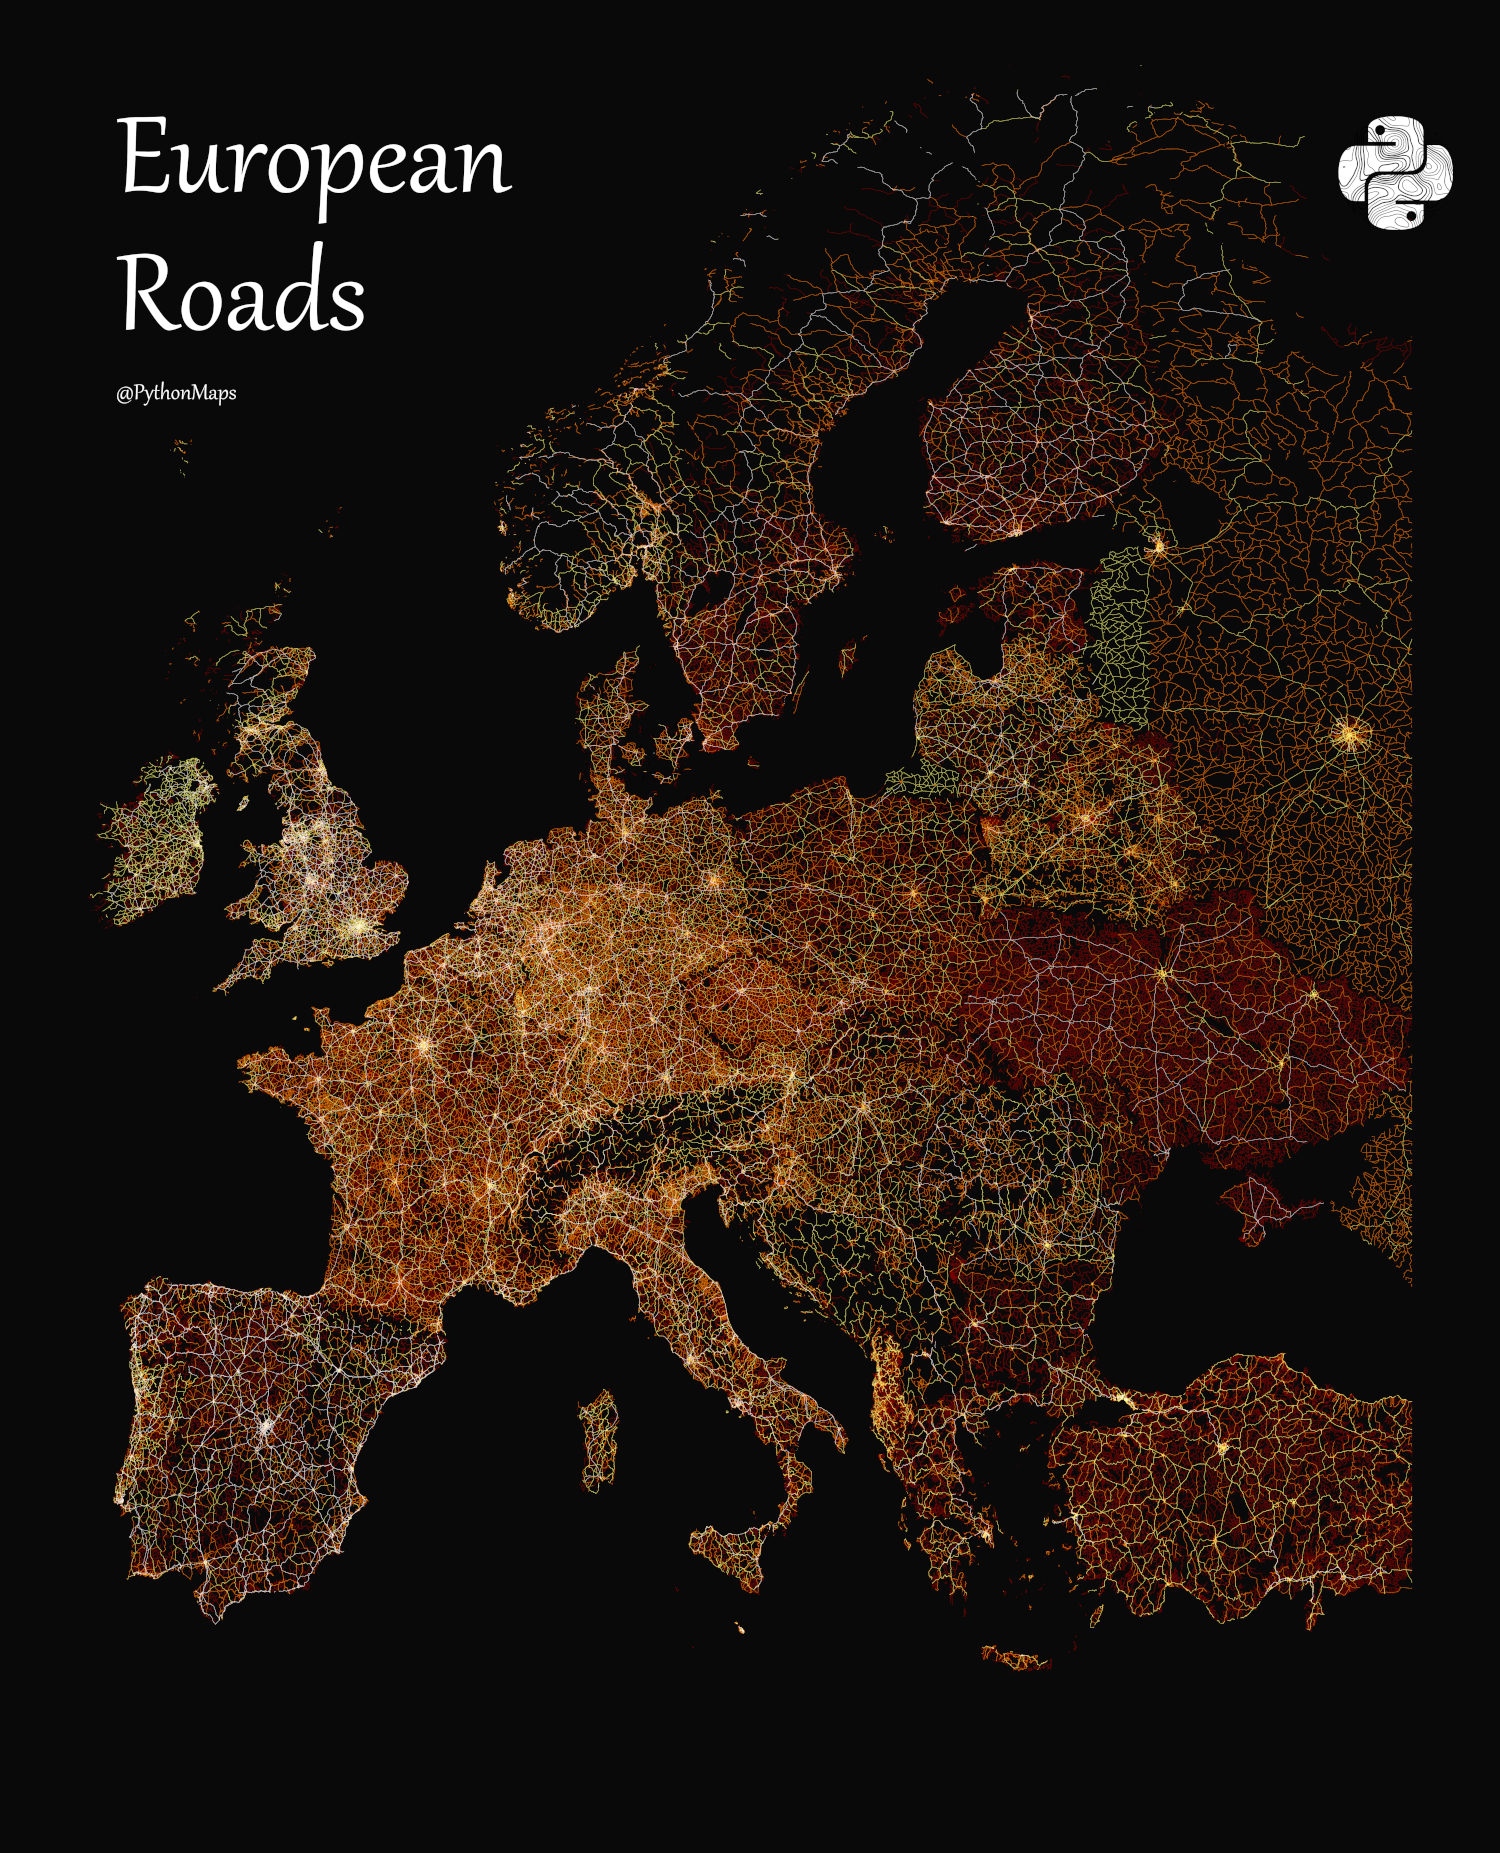 A map of all roads in Europe, visualized by type.